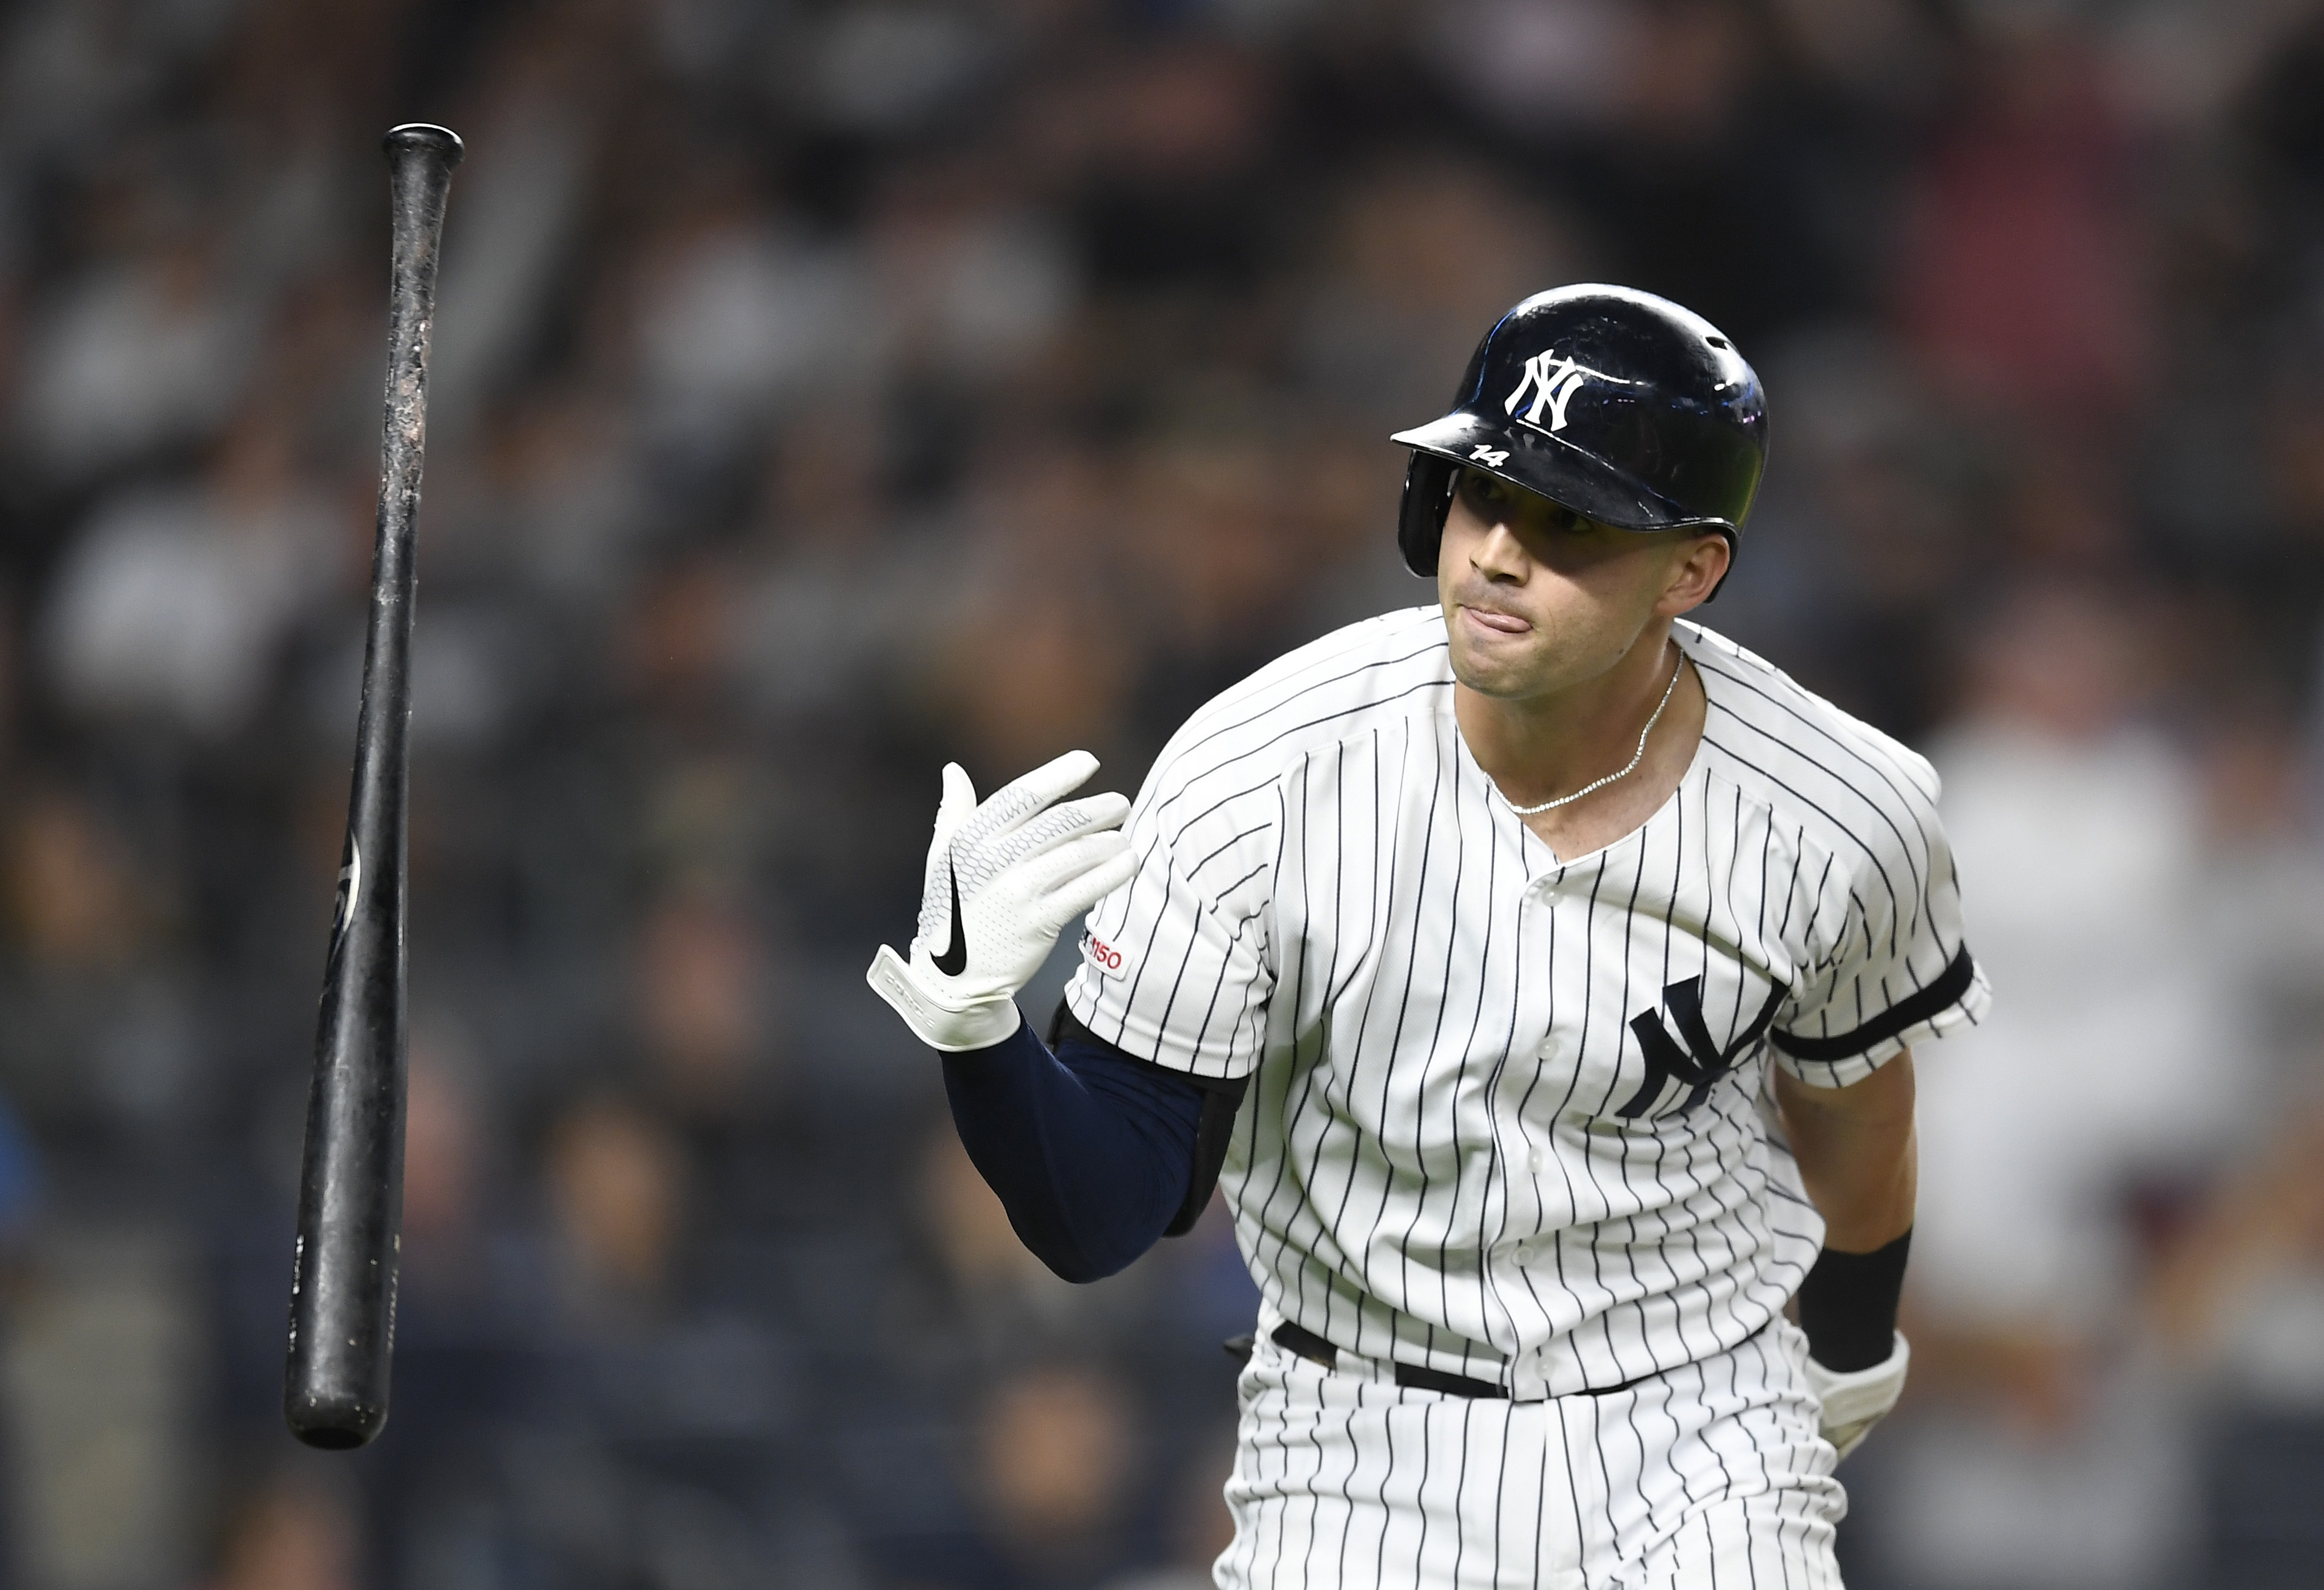 Yankees' utility man may have rediscovered his form